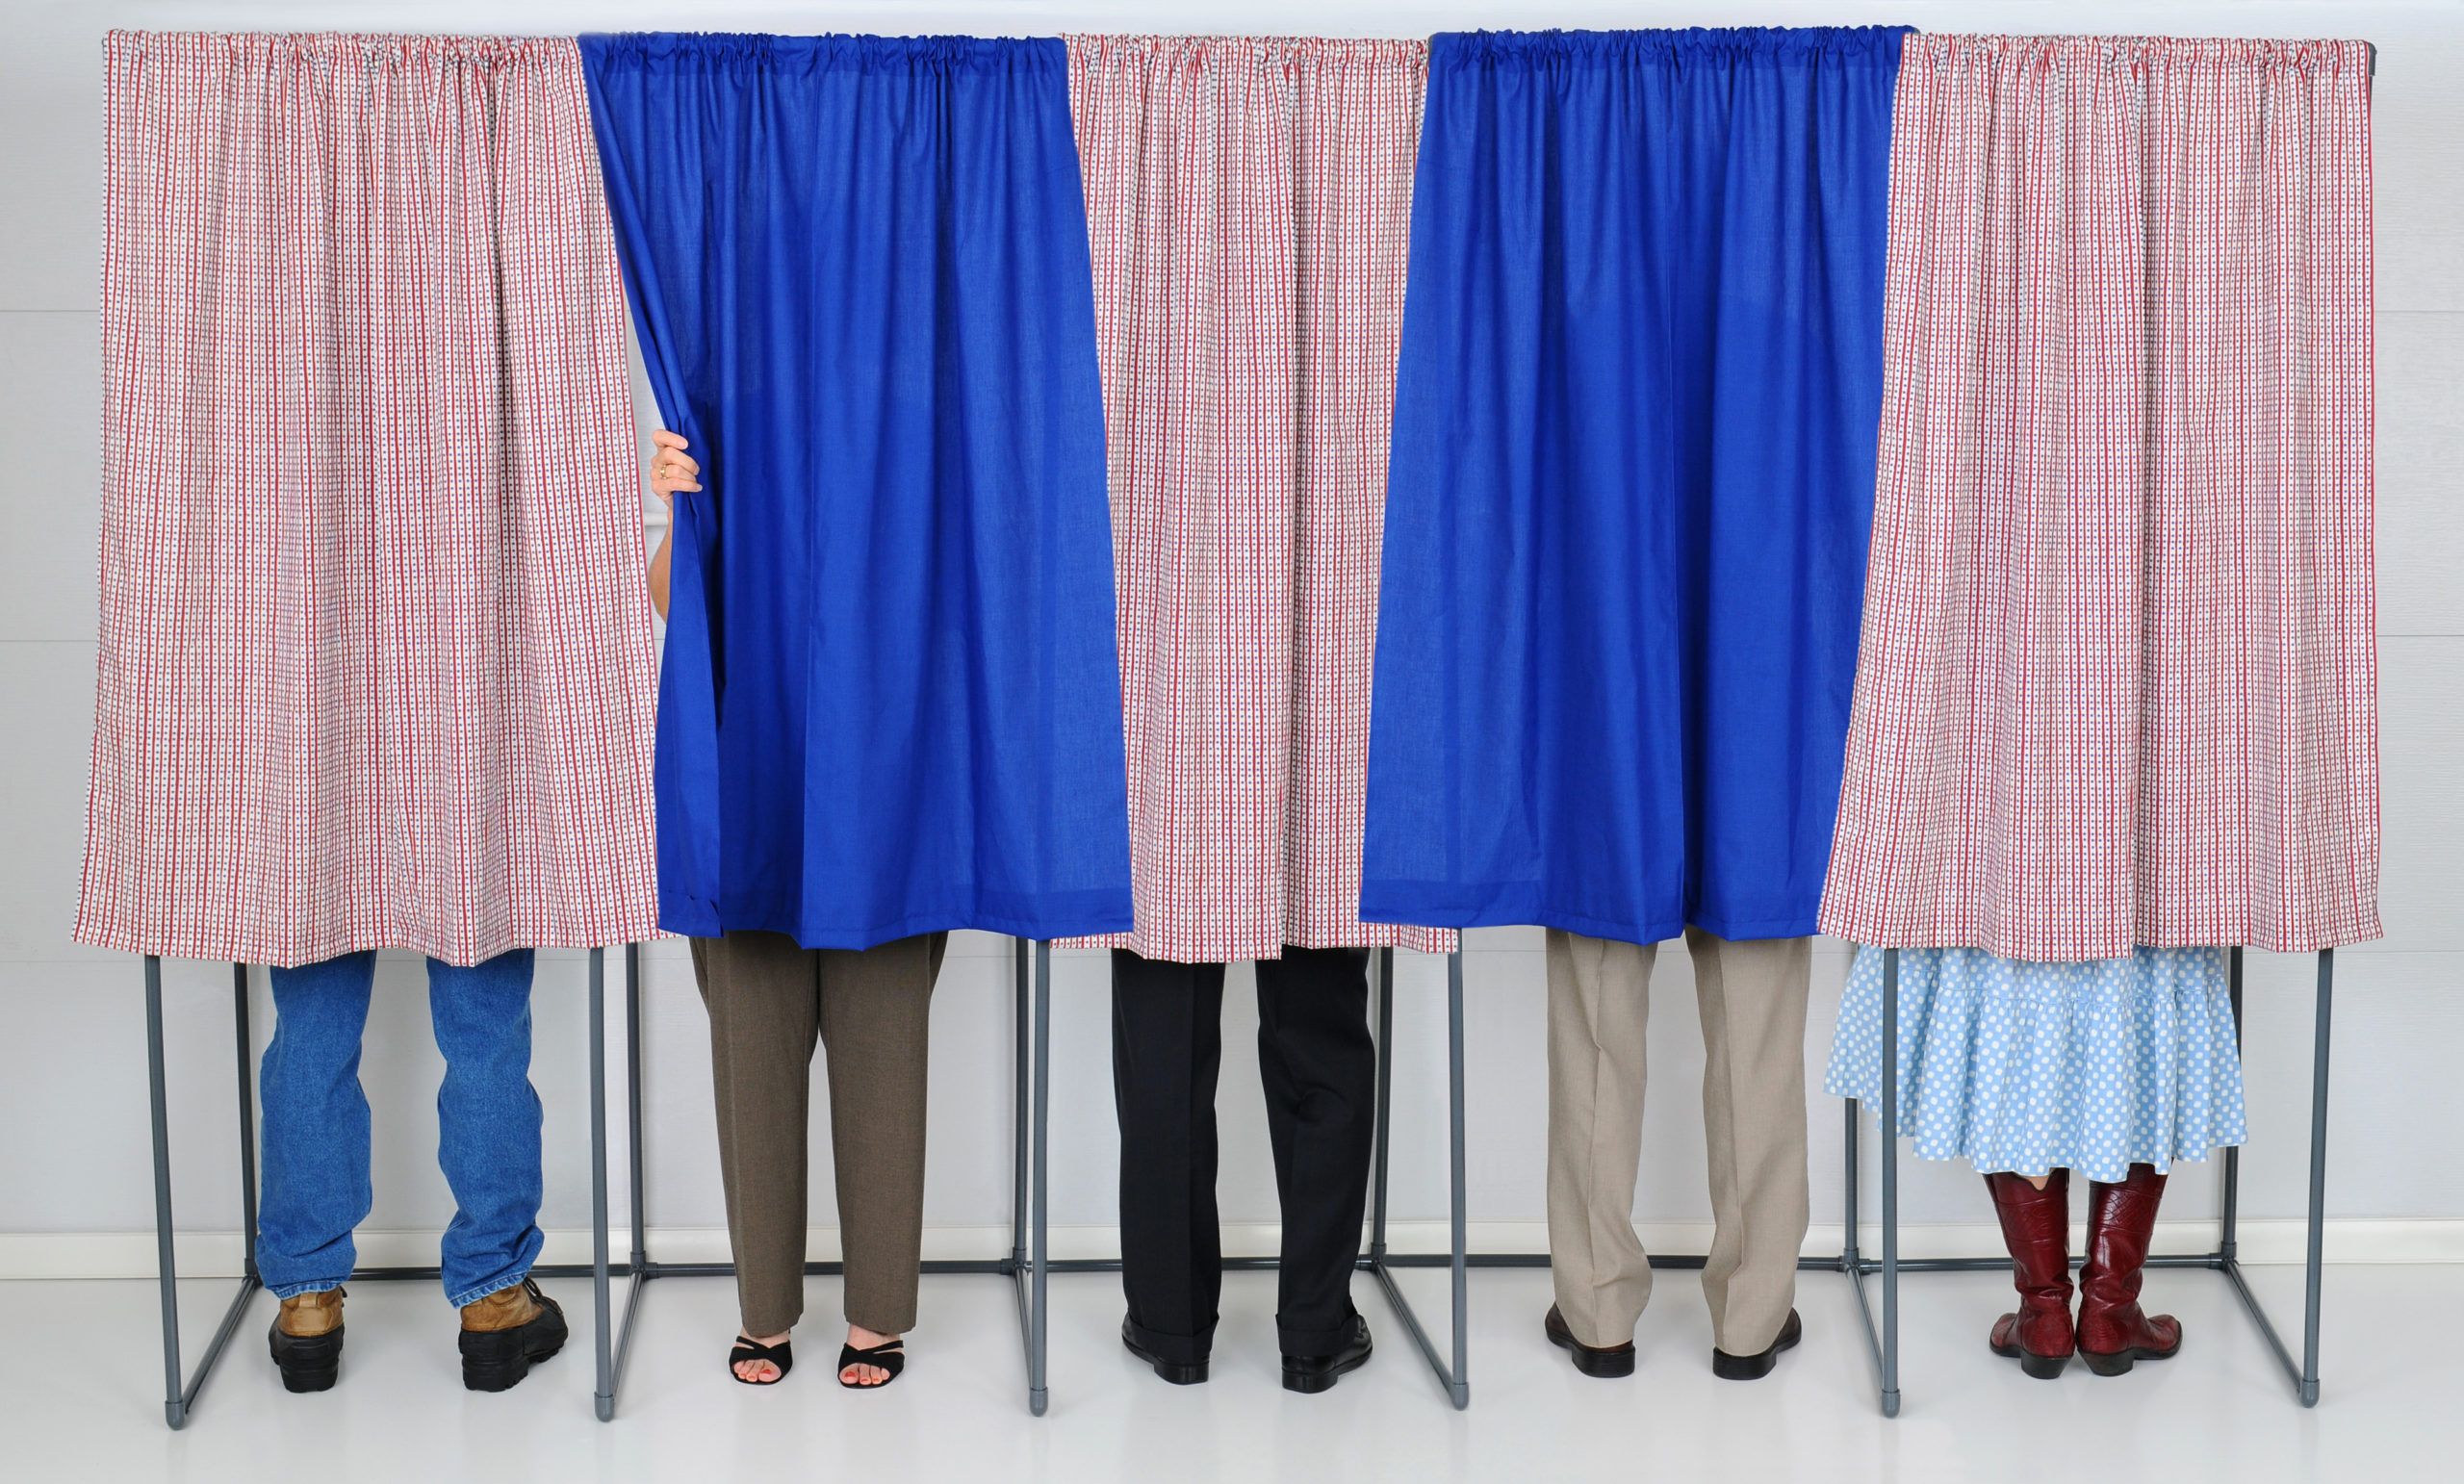 Voters stand in voting booths, concealed by red and blue curtains - photo id